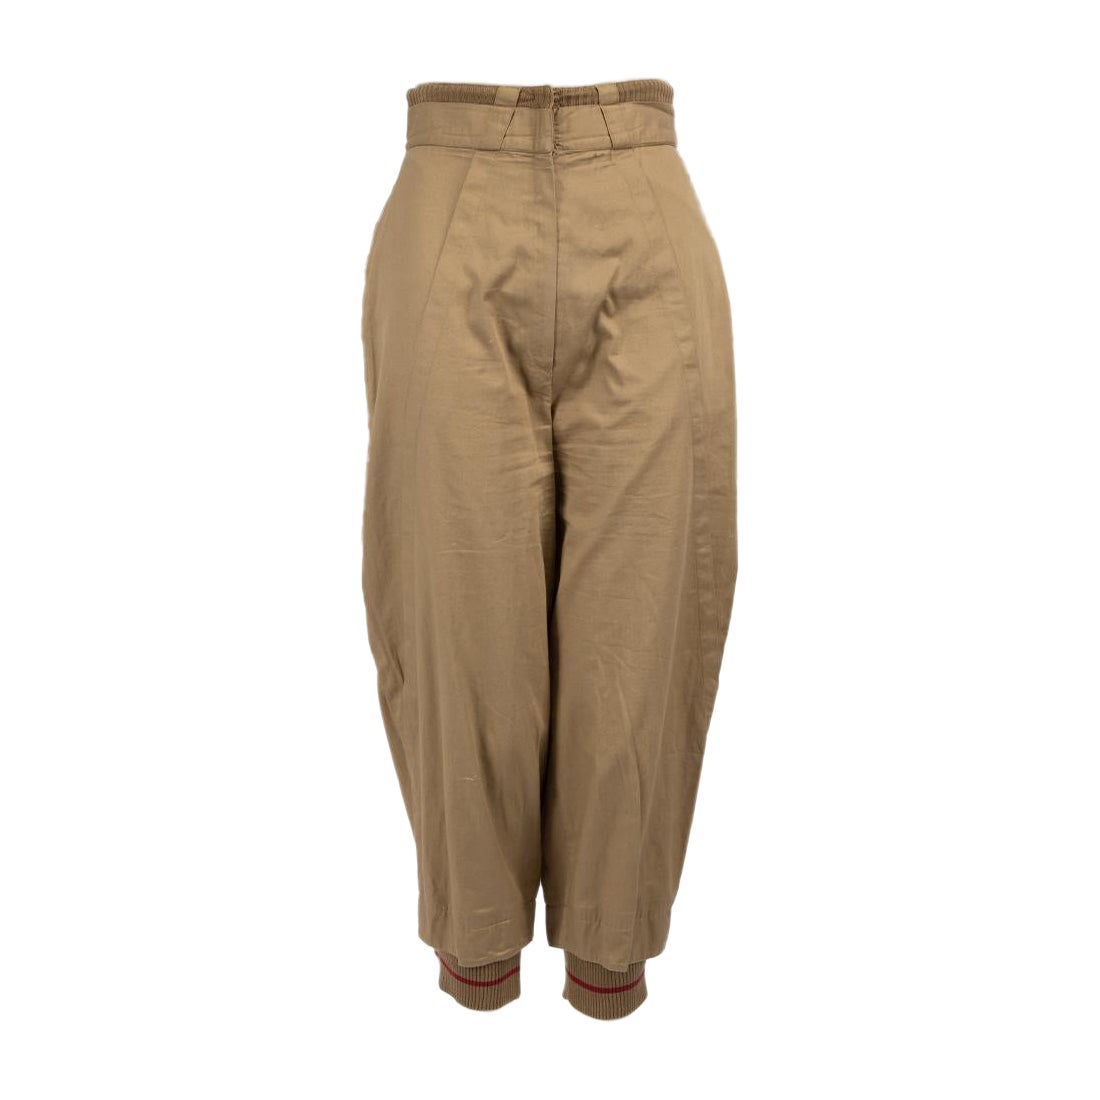 Versace Brown High Rise Tapered Trousers Größe XS im Angebot